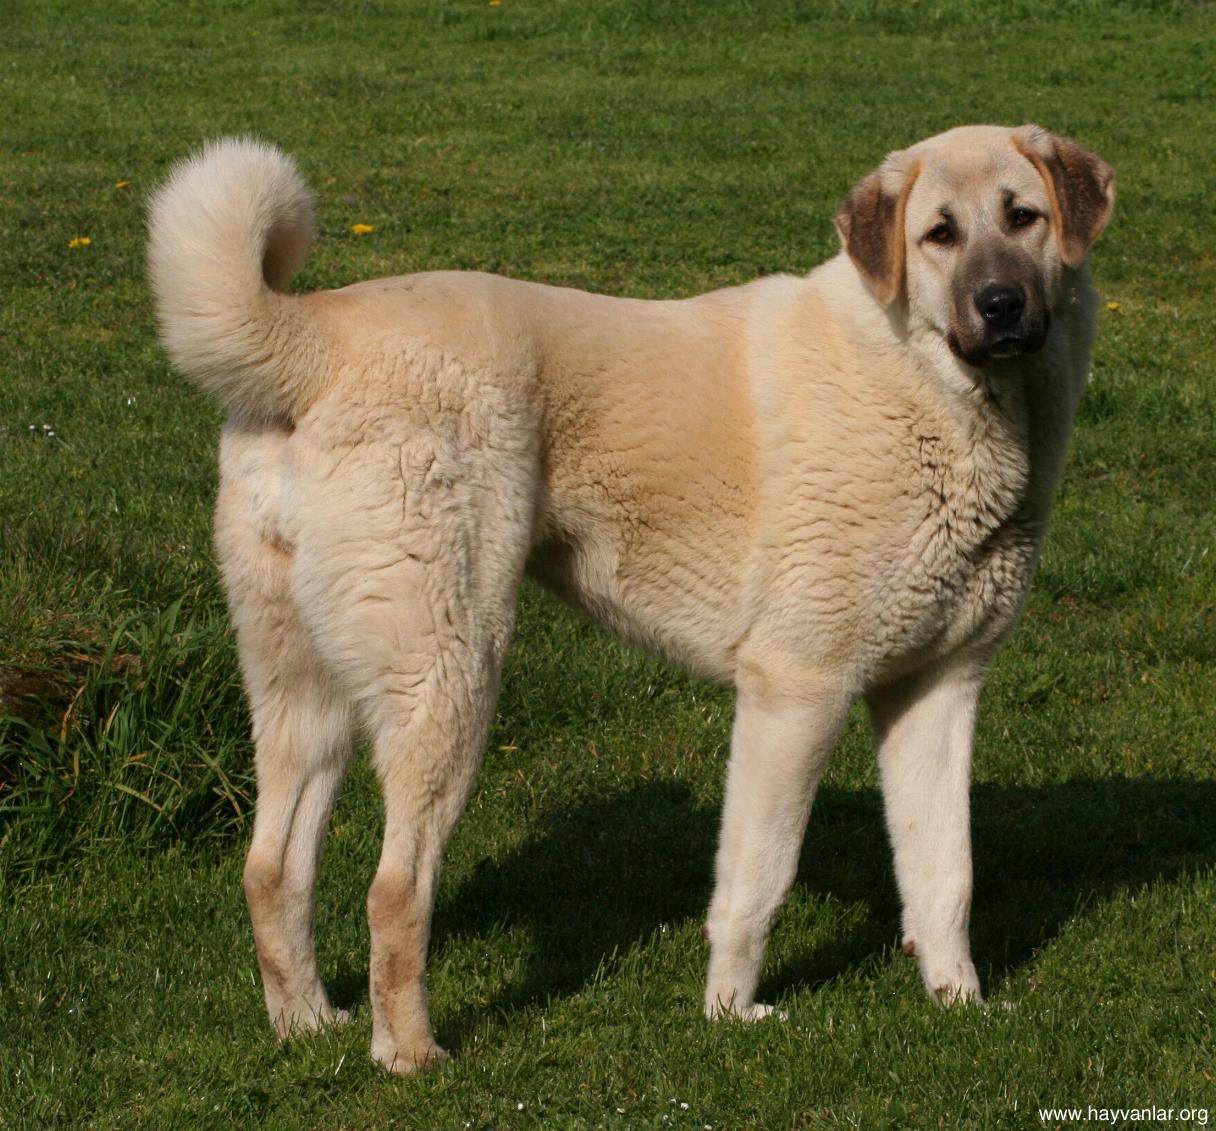 A large white dog with a black muzzle, brown ears, and a curly tail